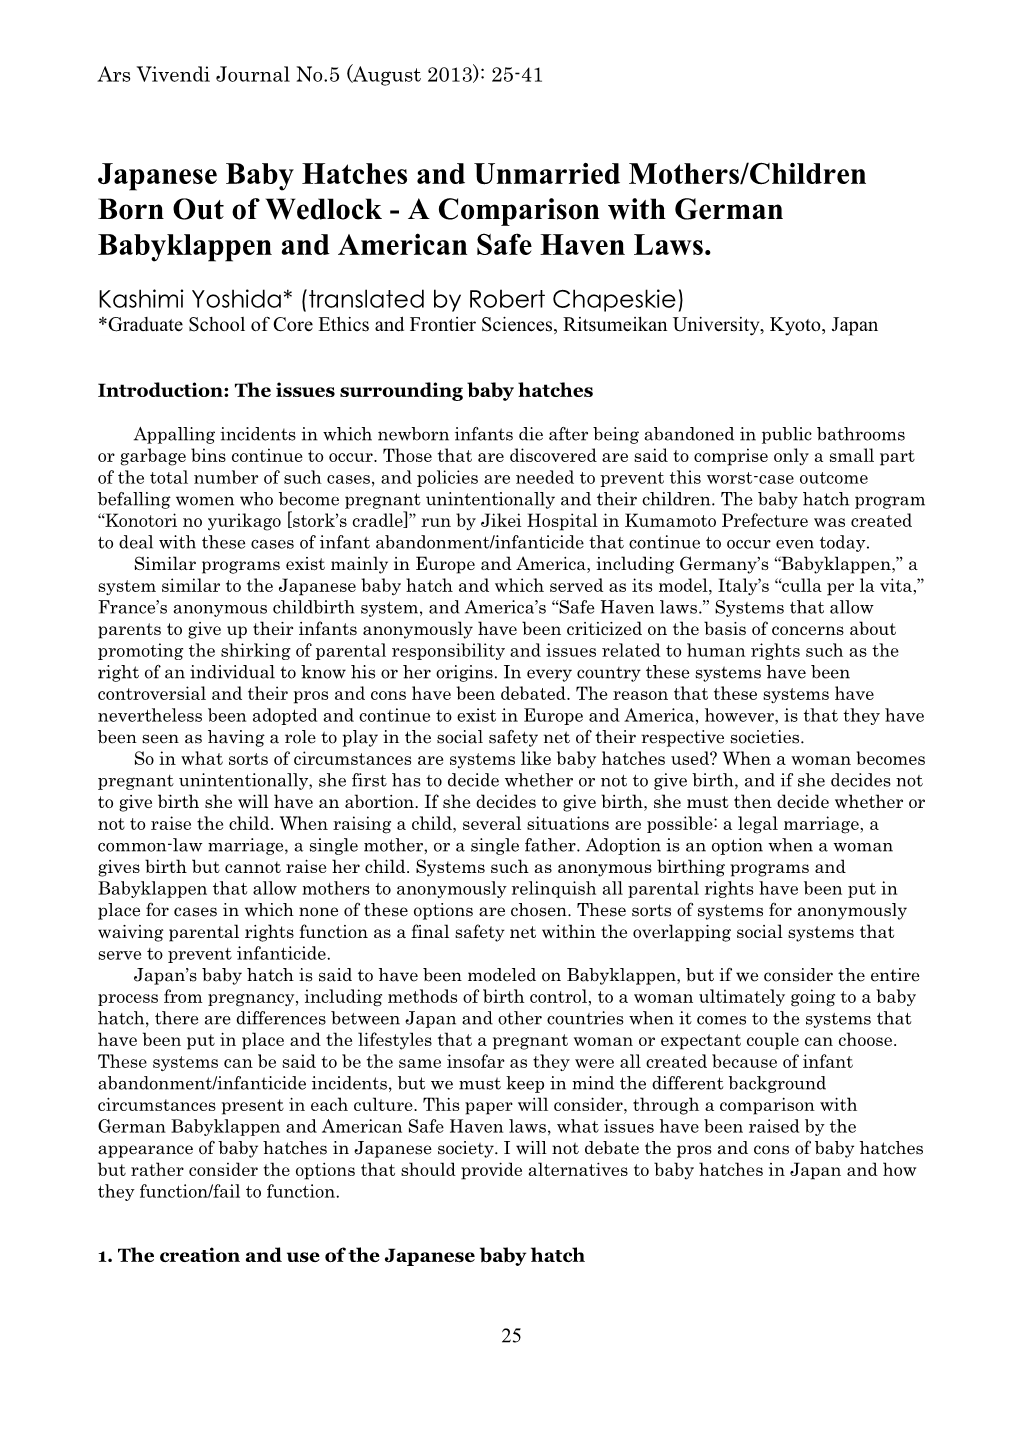 Japanese Baby Hatches and Unmarried Mothers/Children Born out of Wedlock - a Comparison with German Babyklappen and American Safe Haven Laws